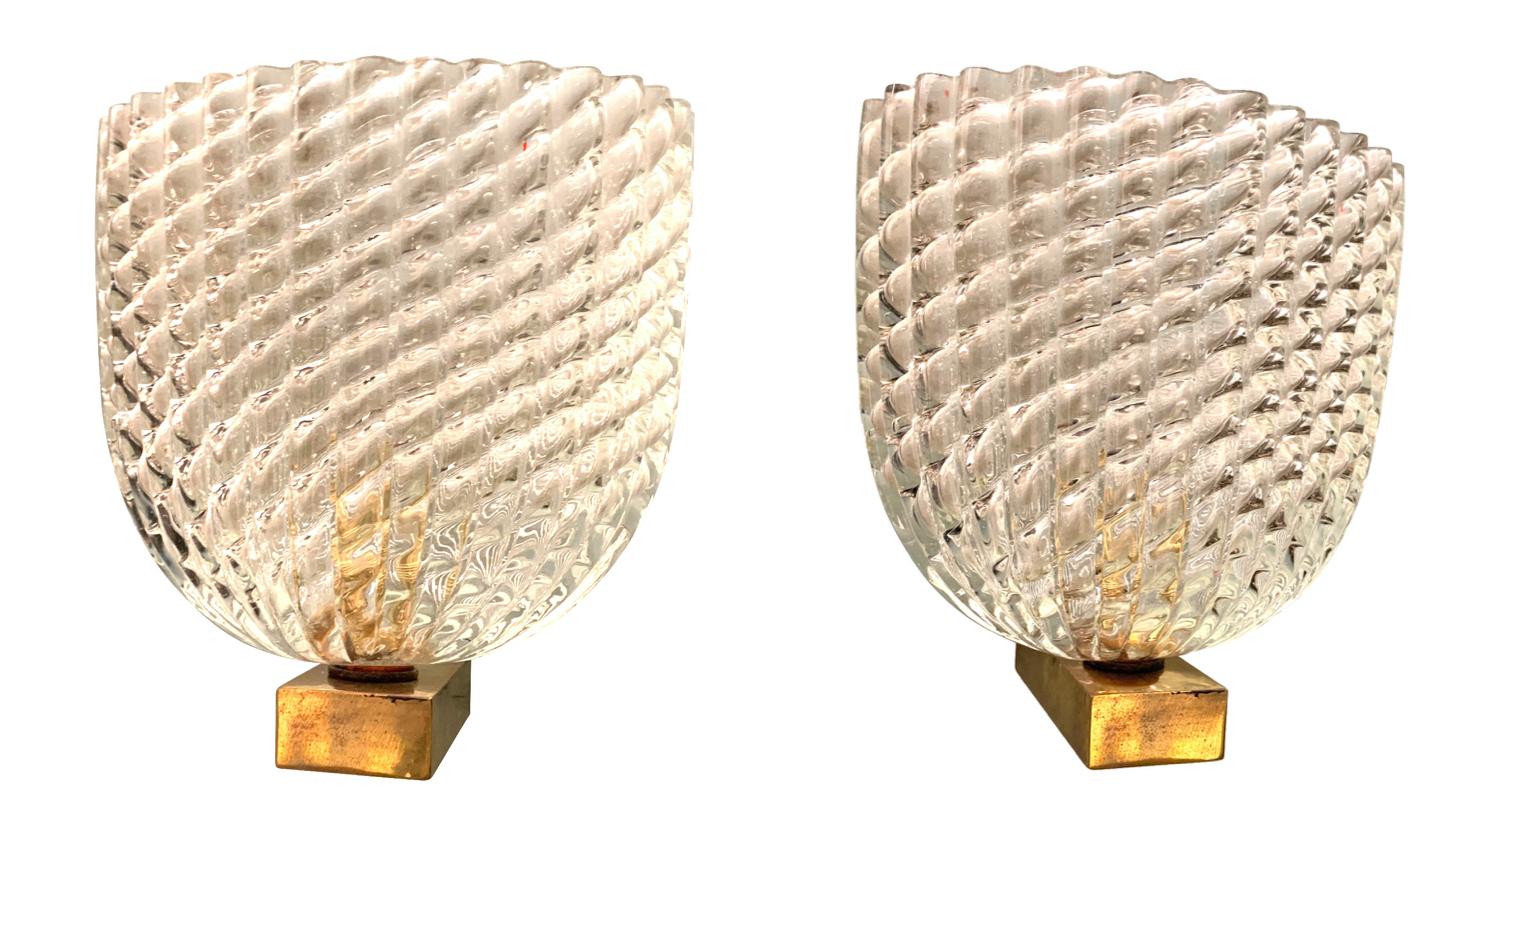 A stunning pair of 1940s Barovier & Toso glass wall sconces with ribbed glass shades mounted on a solid brass arm, with single bulb fitting re-wired and PAT tested. Two pairs available the listed price is for a pair.